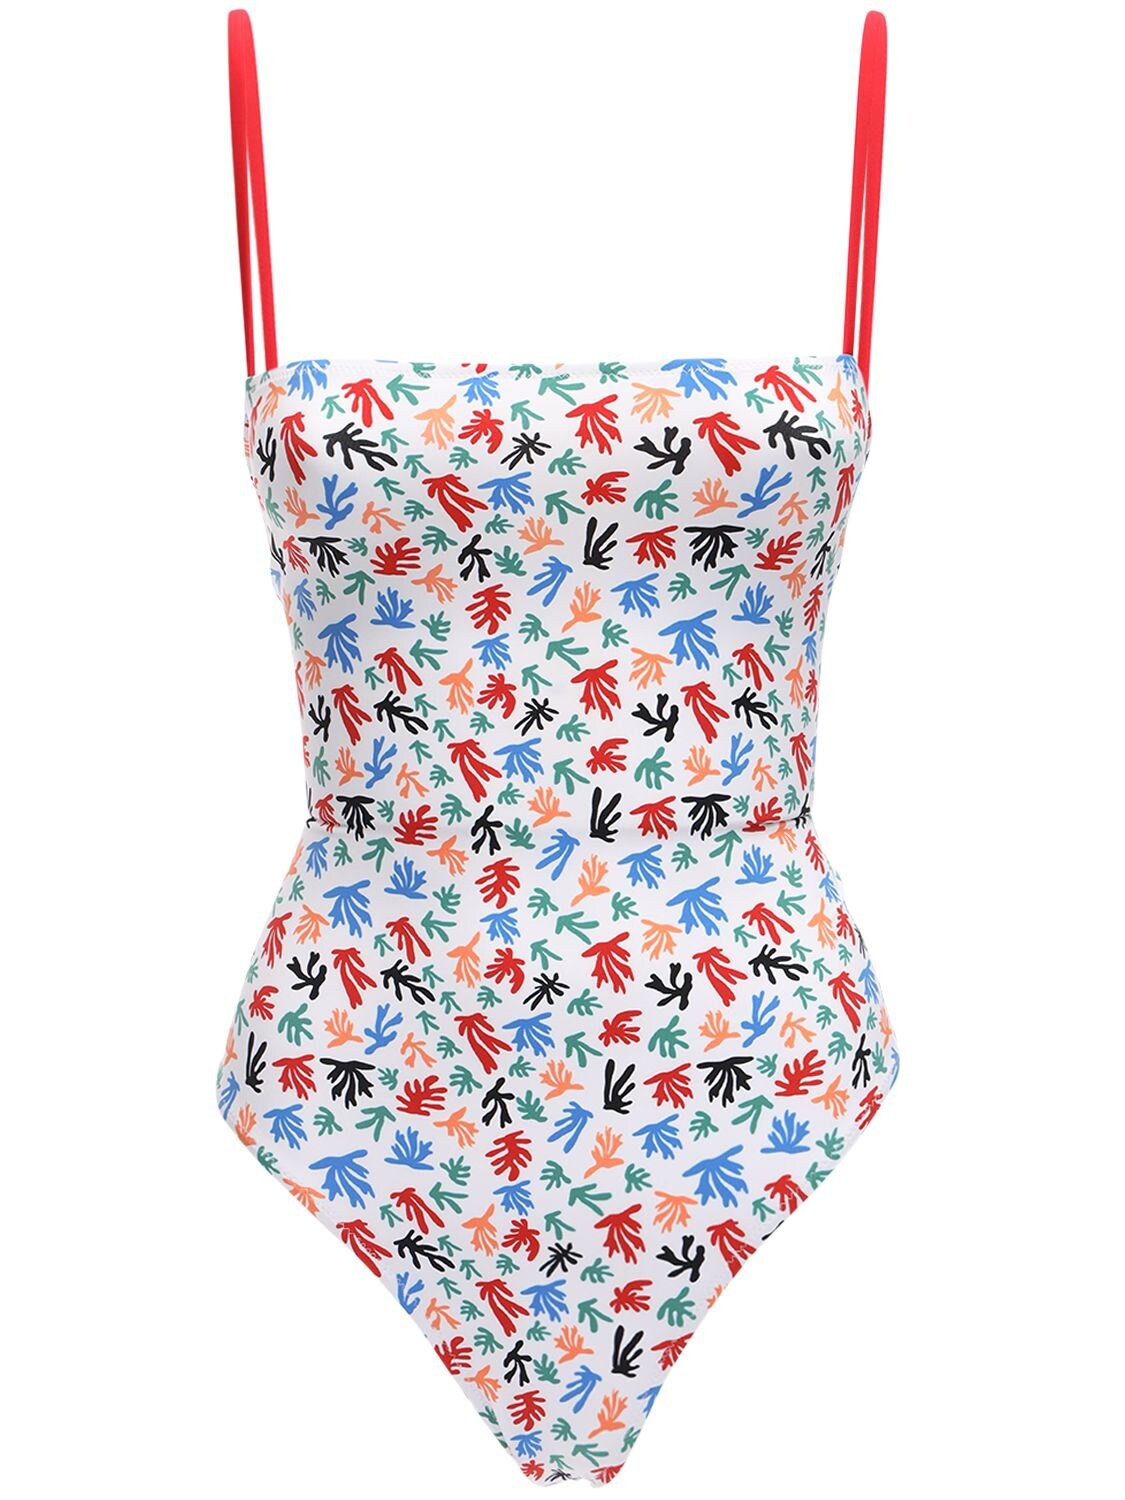 FISCH SUCRE PRINTED ONE PIECE SWIMSUIT,71ICDT005-SEVOUKKGQ09SQUW1